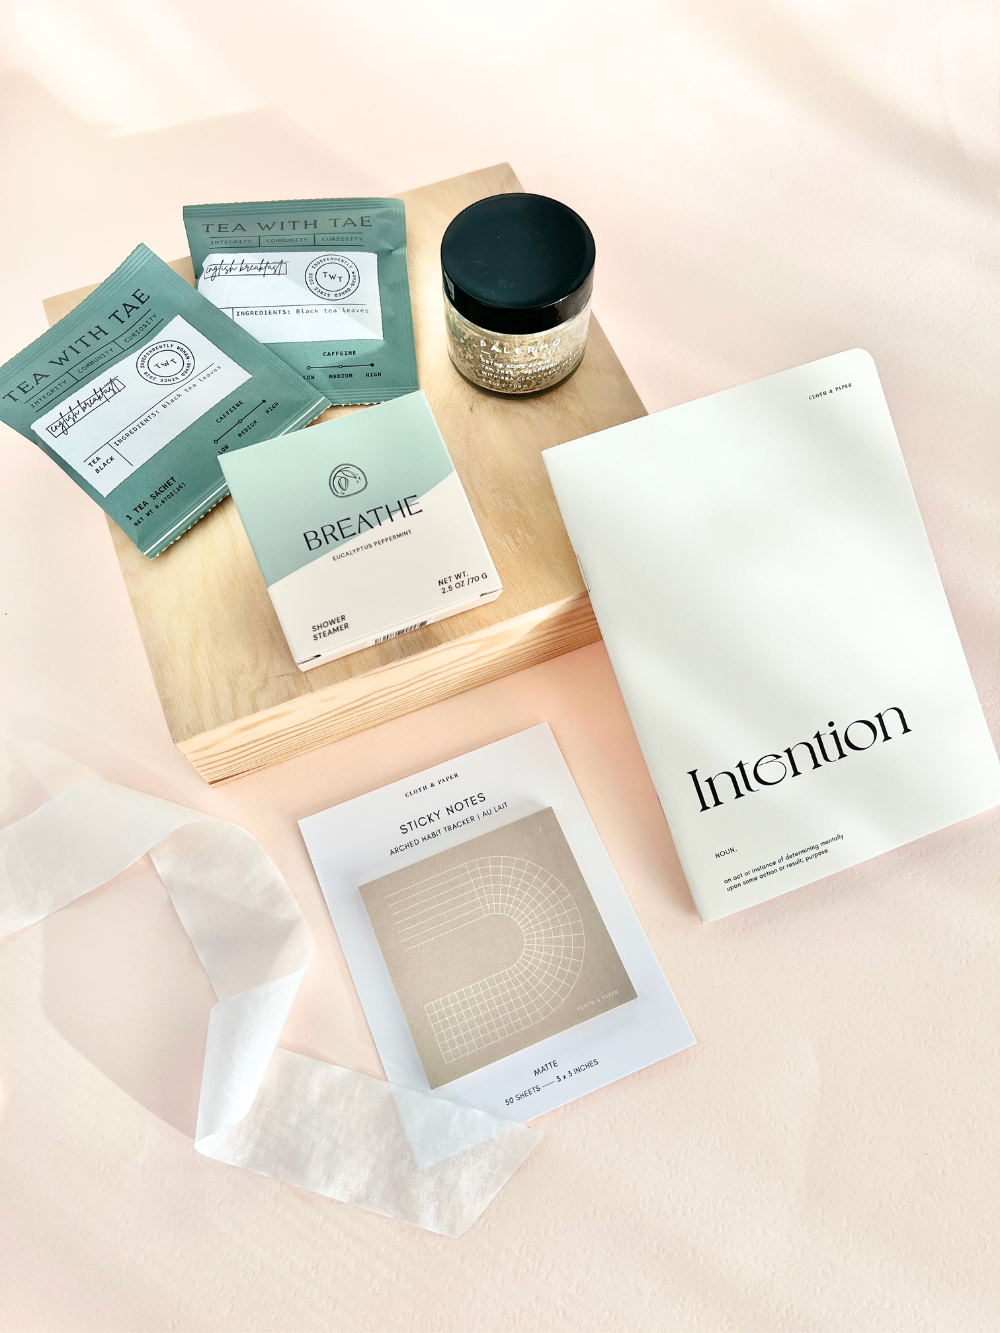 The Intentions Gift Box